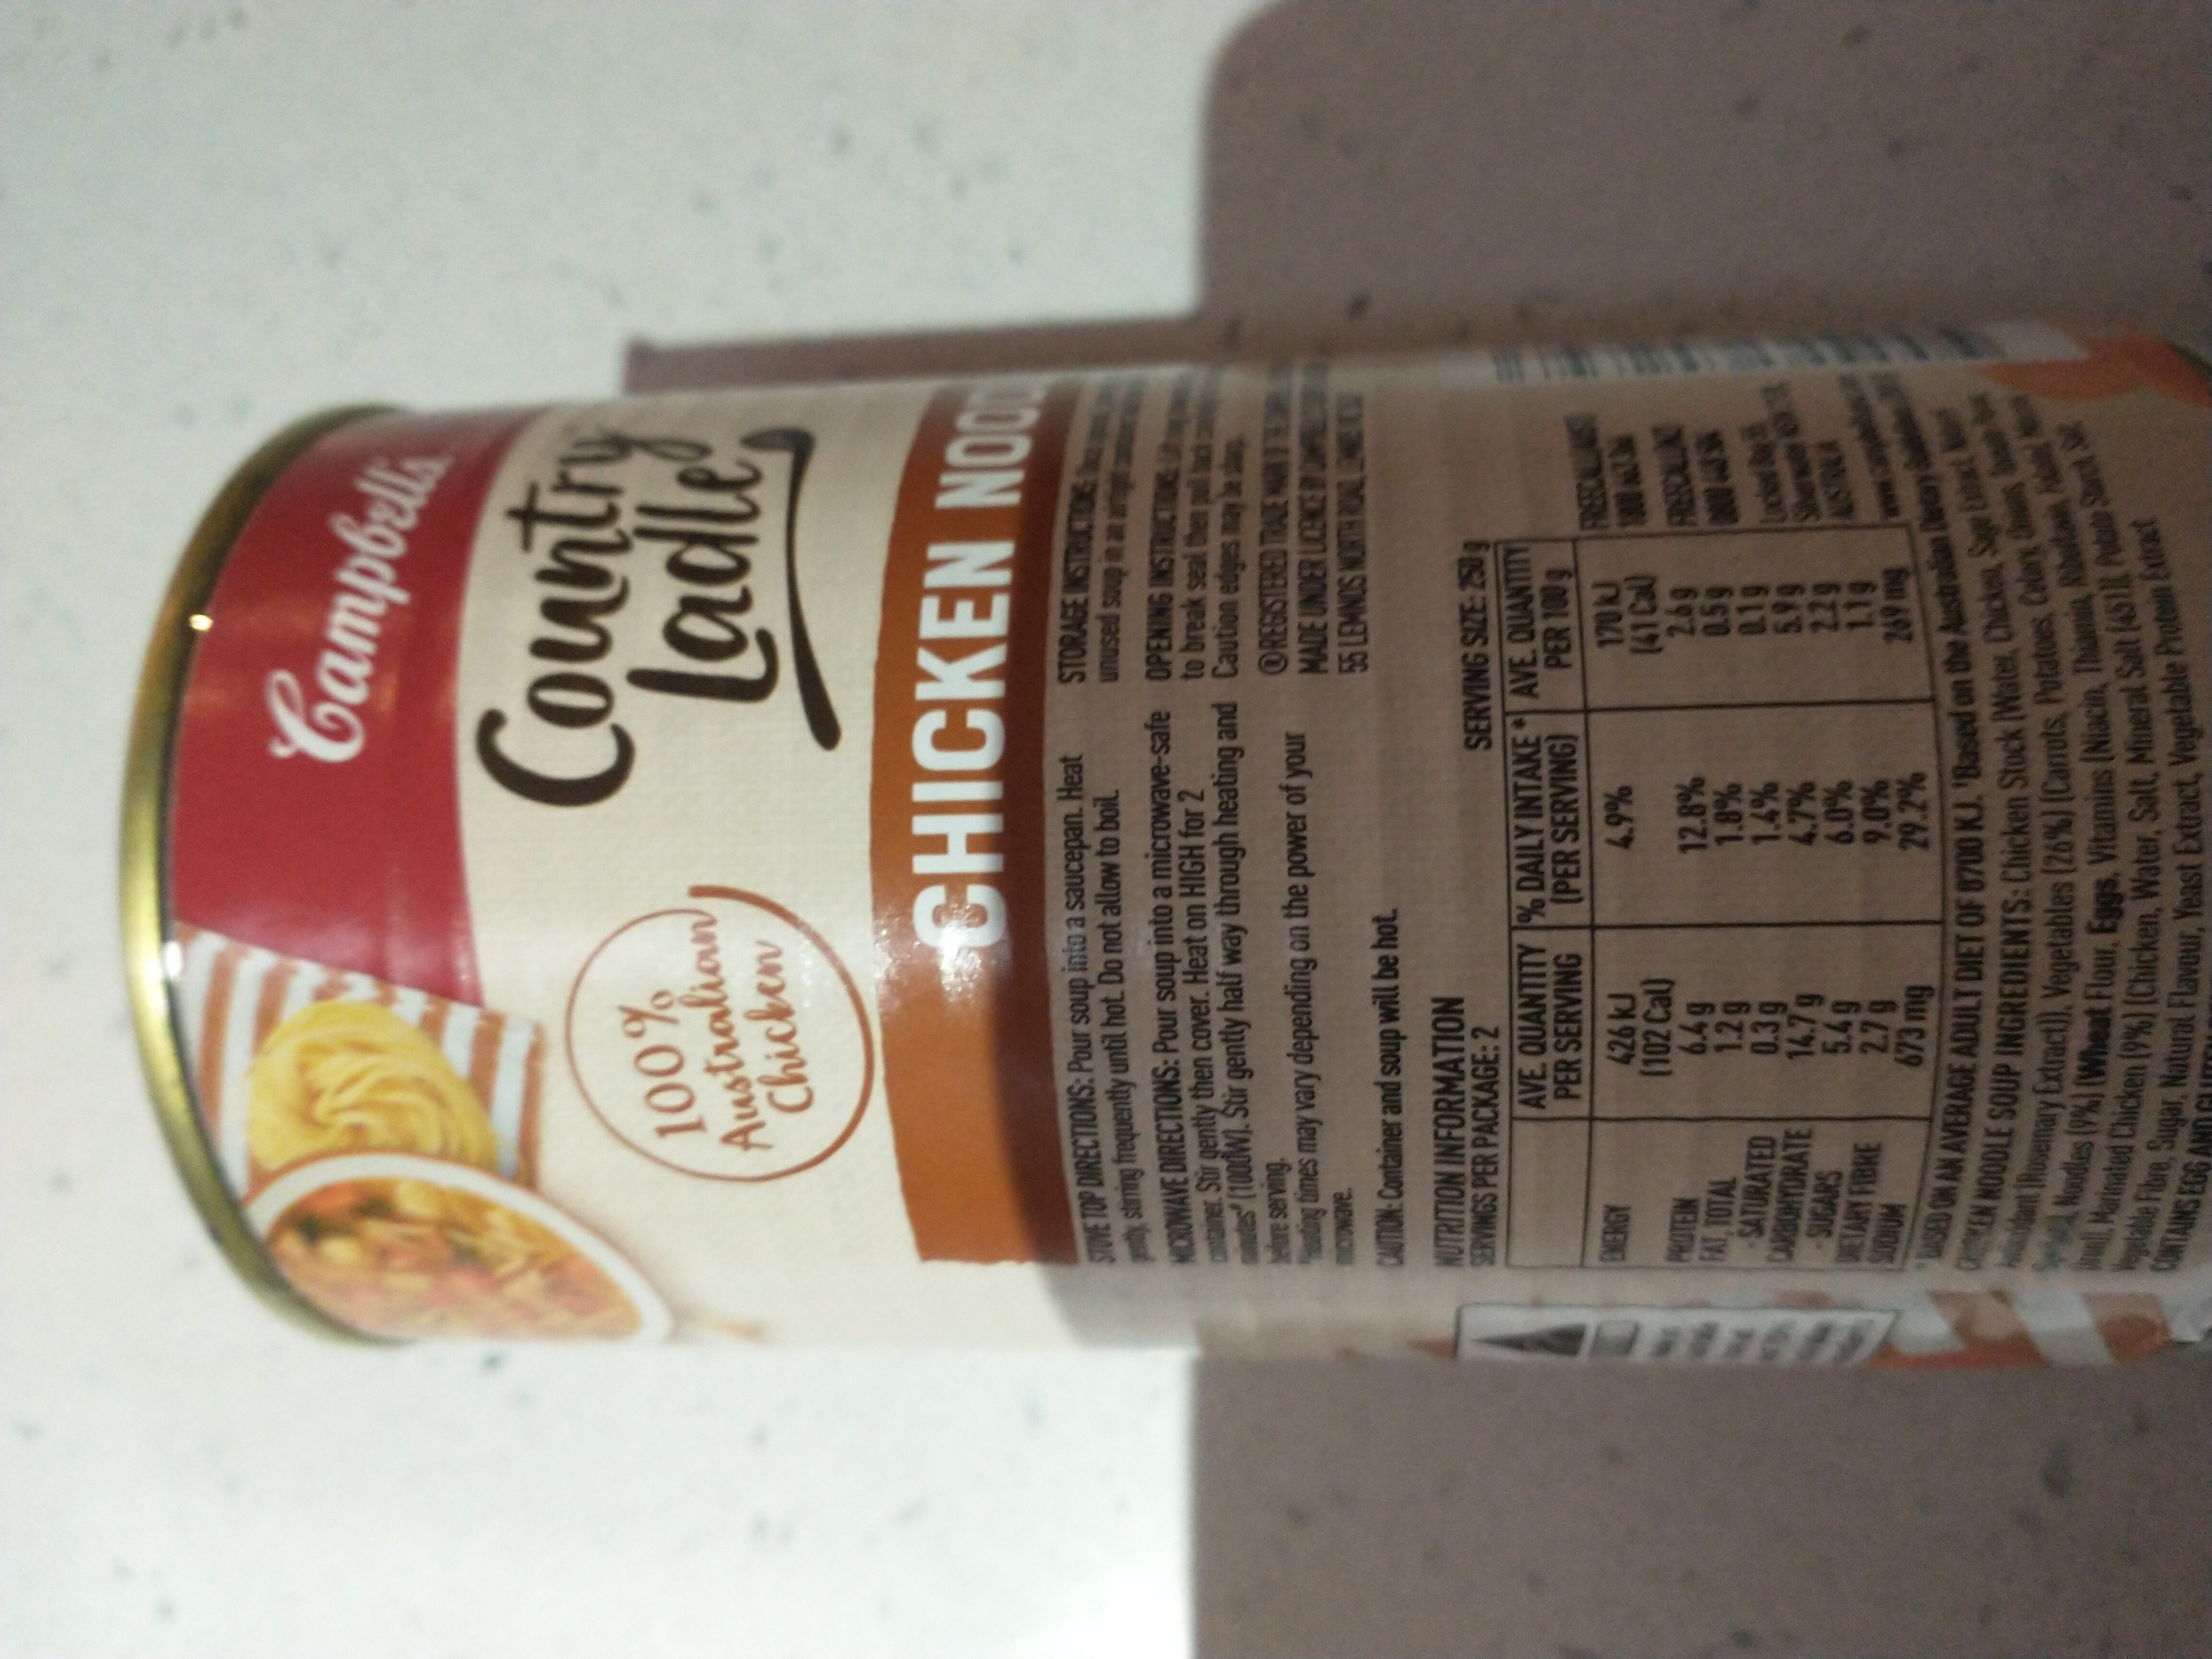 Campbell's chicken noodle - Ingredients